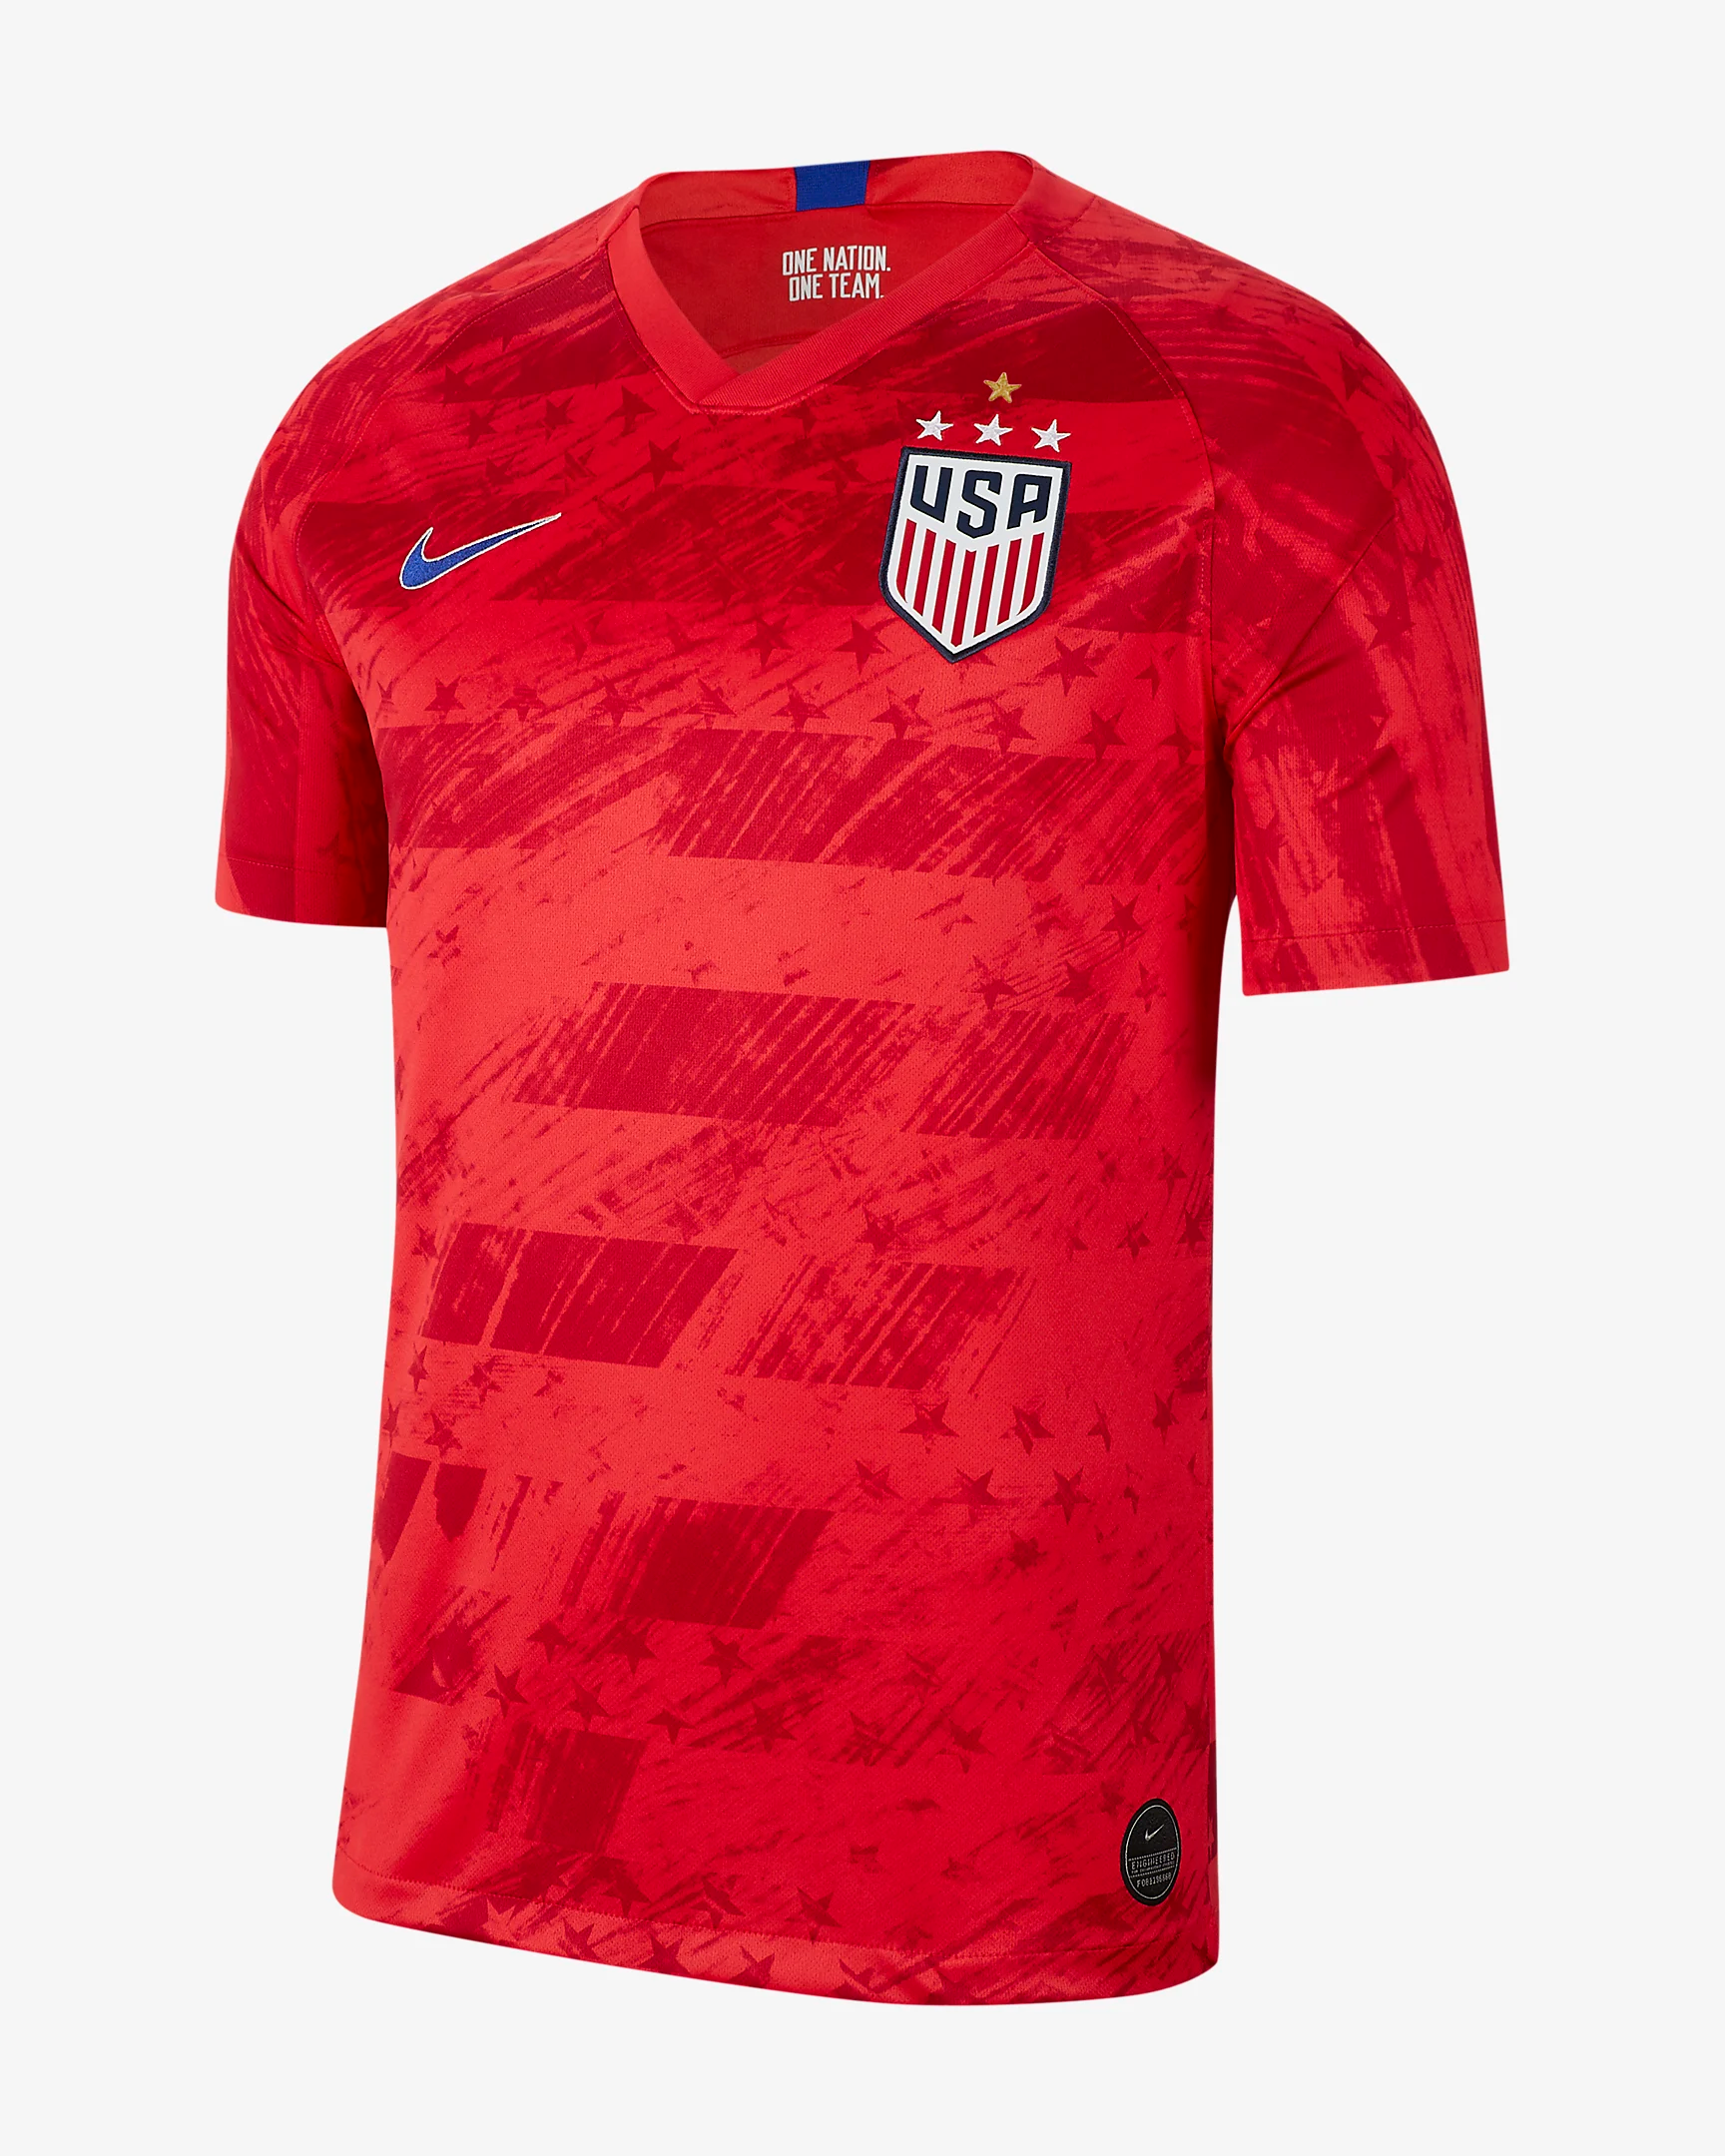 us-2019-stadium-away-mens-soccer-jersey-qsWTmf.png